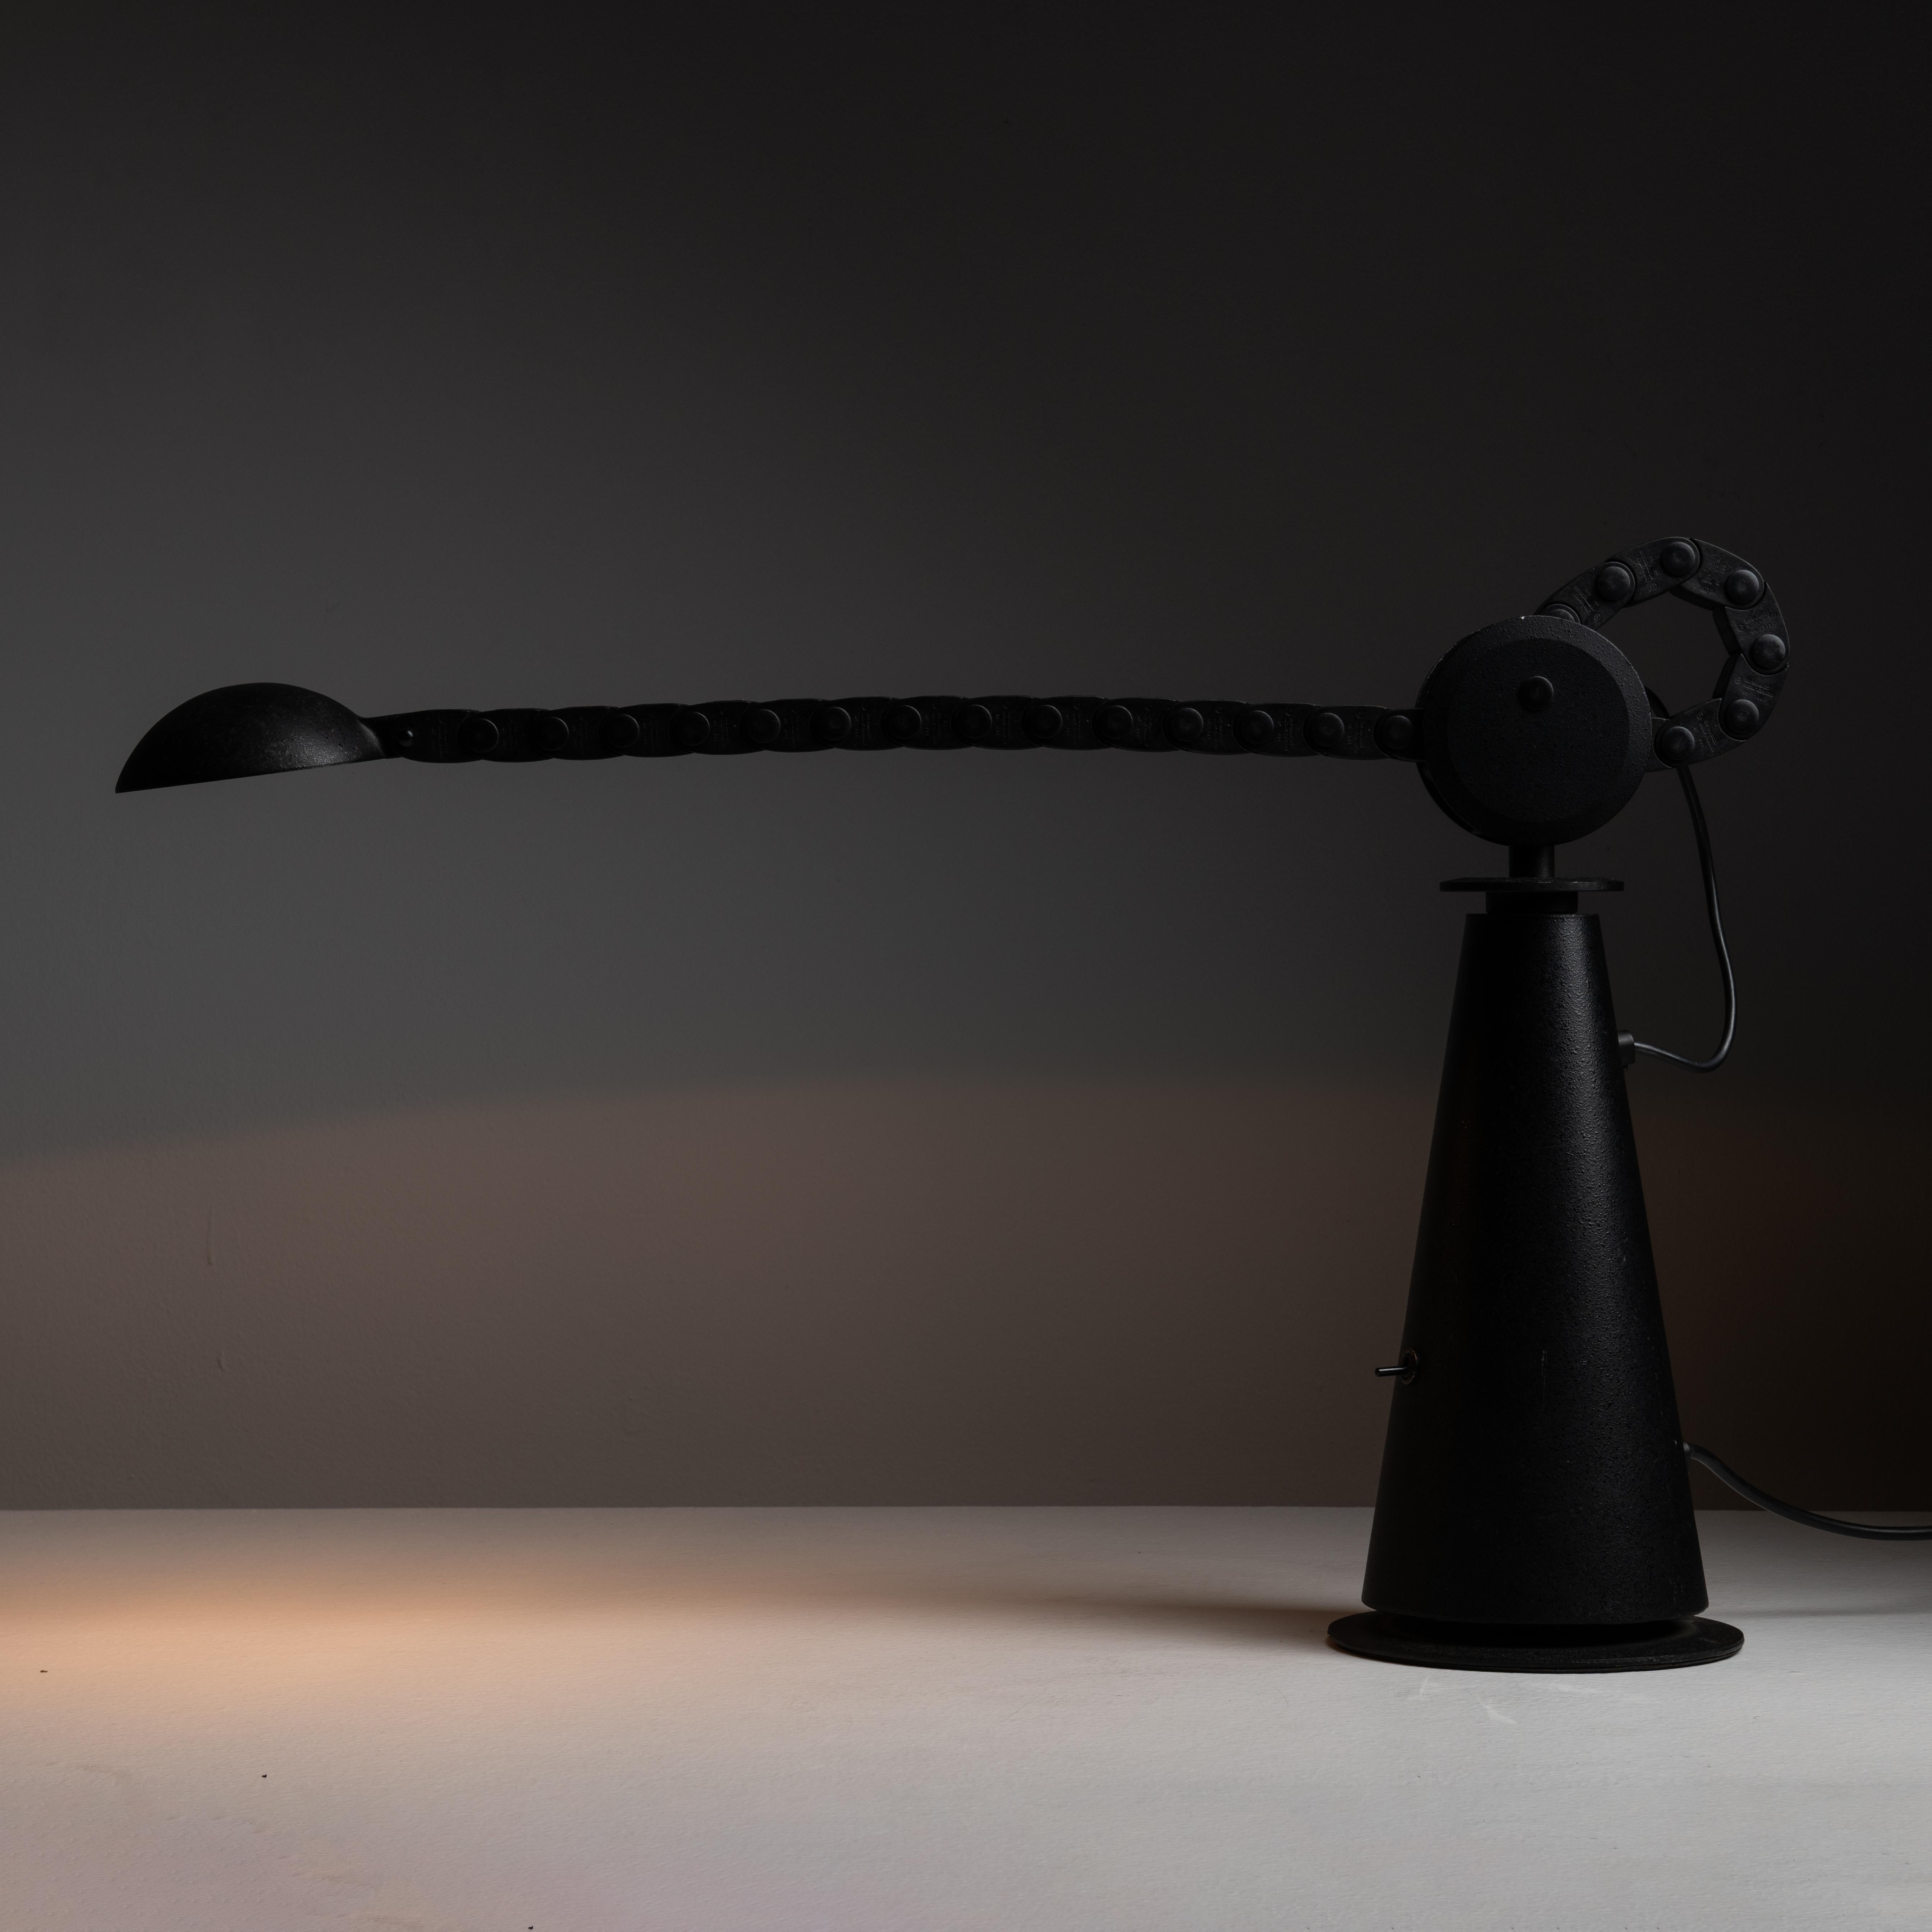 Gaucho table lamp by Studio PER for Egoluce. Designed and manufactured in Italy, circa 1980. Unique industrial table lamp made of tempered steel with black finish. The lamp is depth-adjustable with a belt mechanism that composes the neck of the